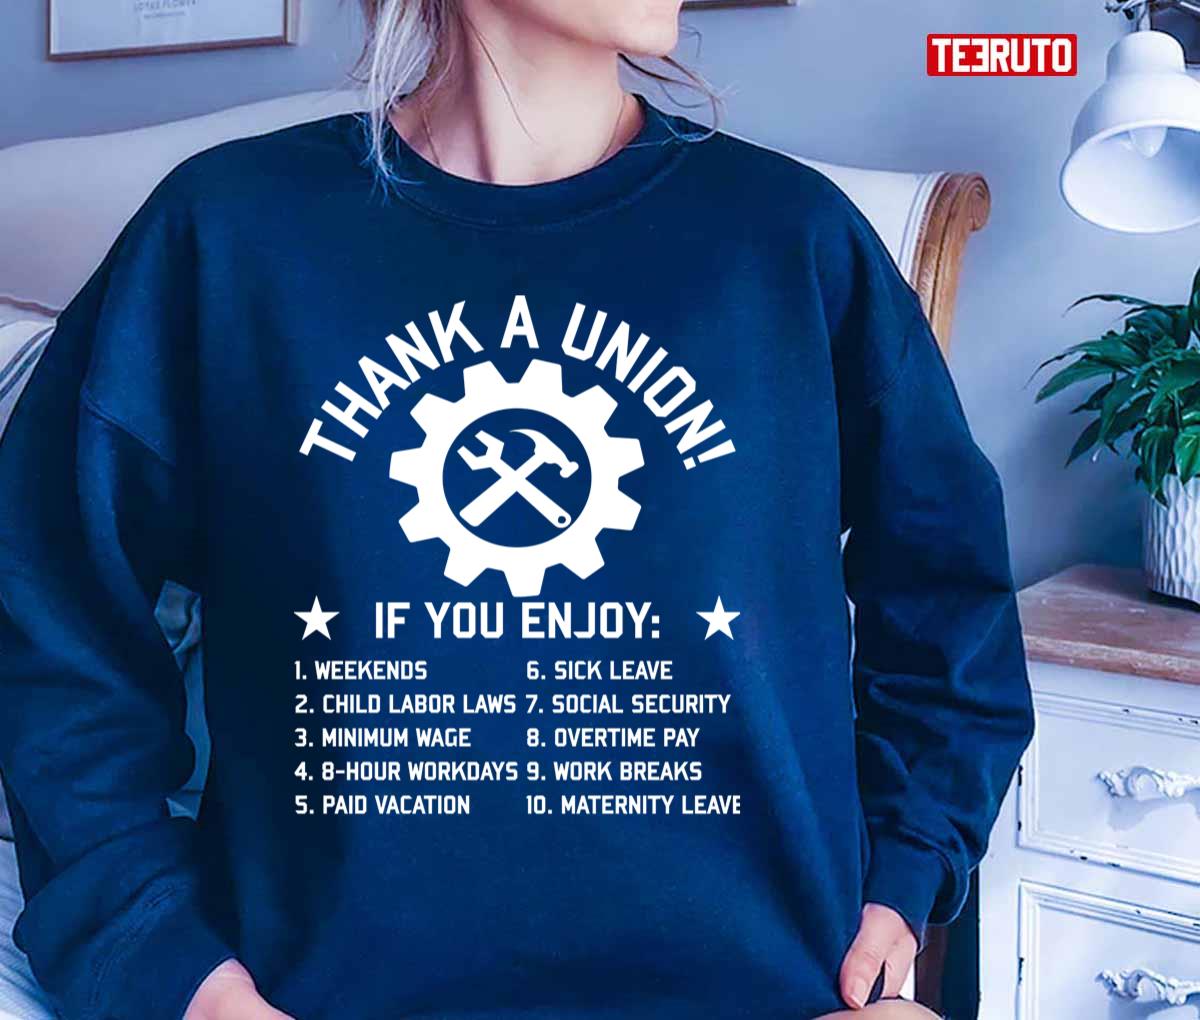 Thank A Union Labor Union Union Strong Pro Worker Industrial Workers Unisex T-Shirt